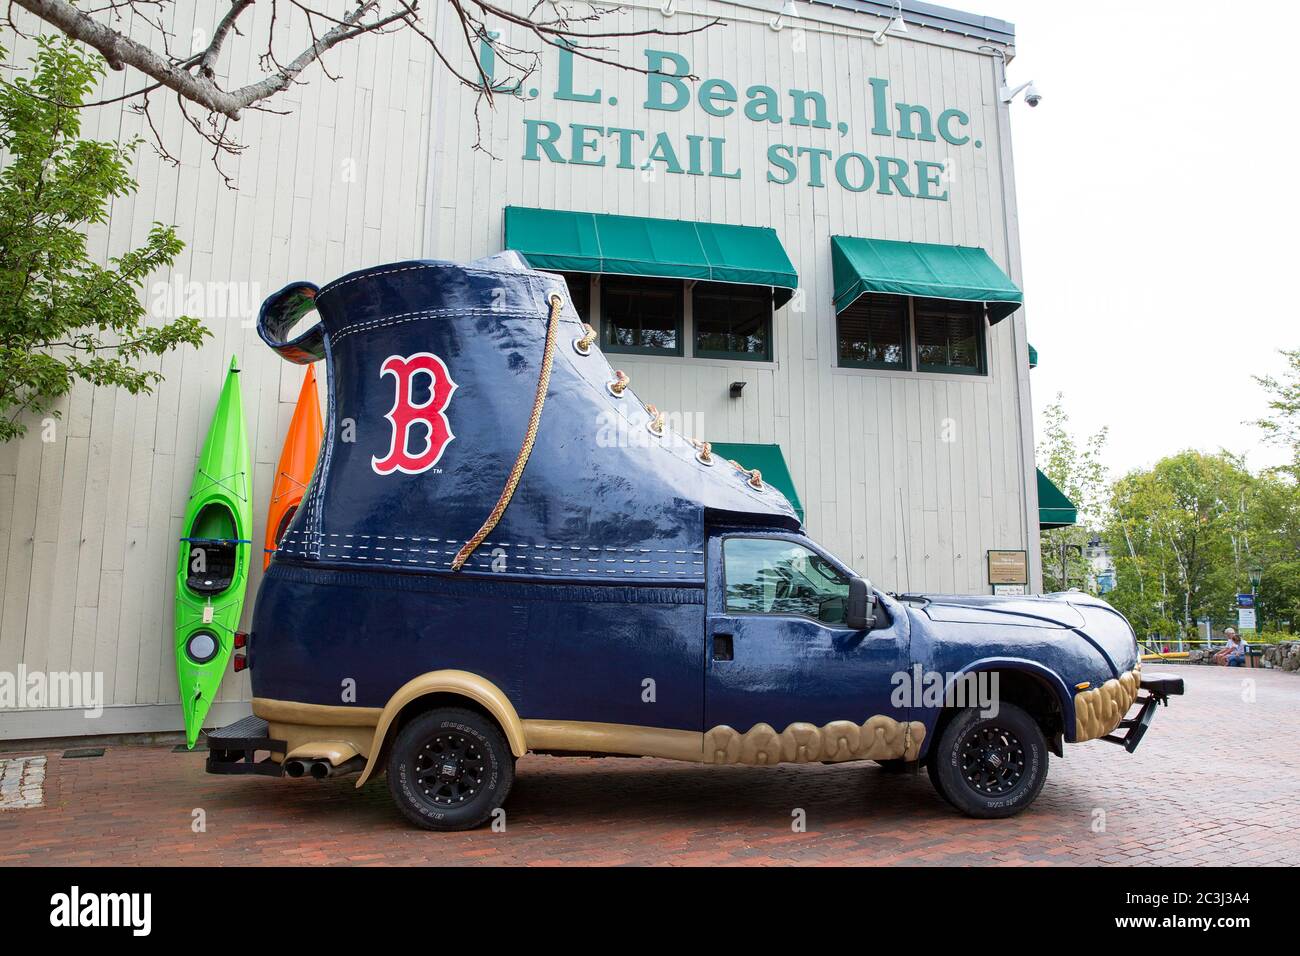 FREEPORT, MAINE, USA-AUG 31st, 2014: L.L. Bean is retail company founded in 1912 by Leon Leonwood Bean. A replica of its famous boot has been coverted Stock Photo